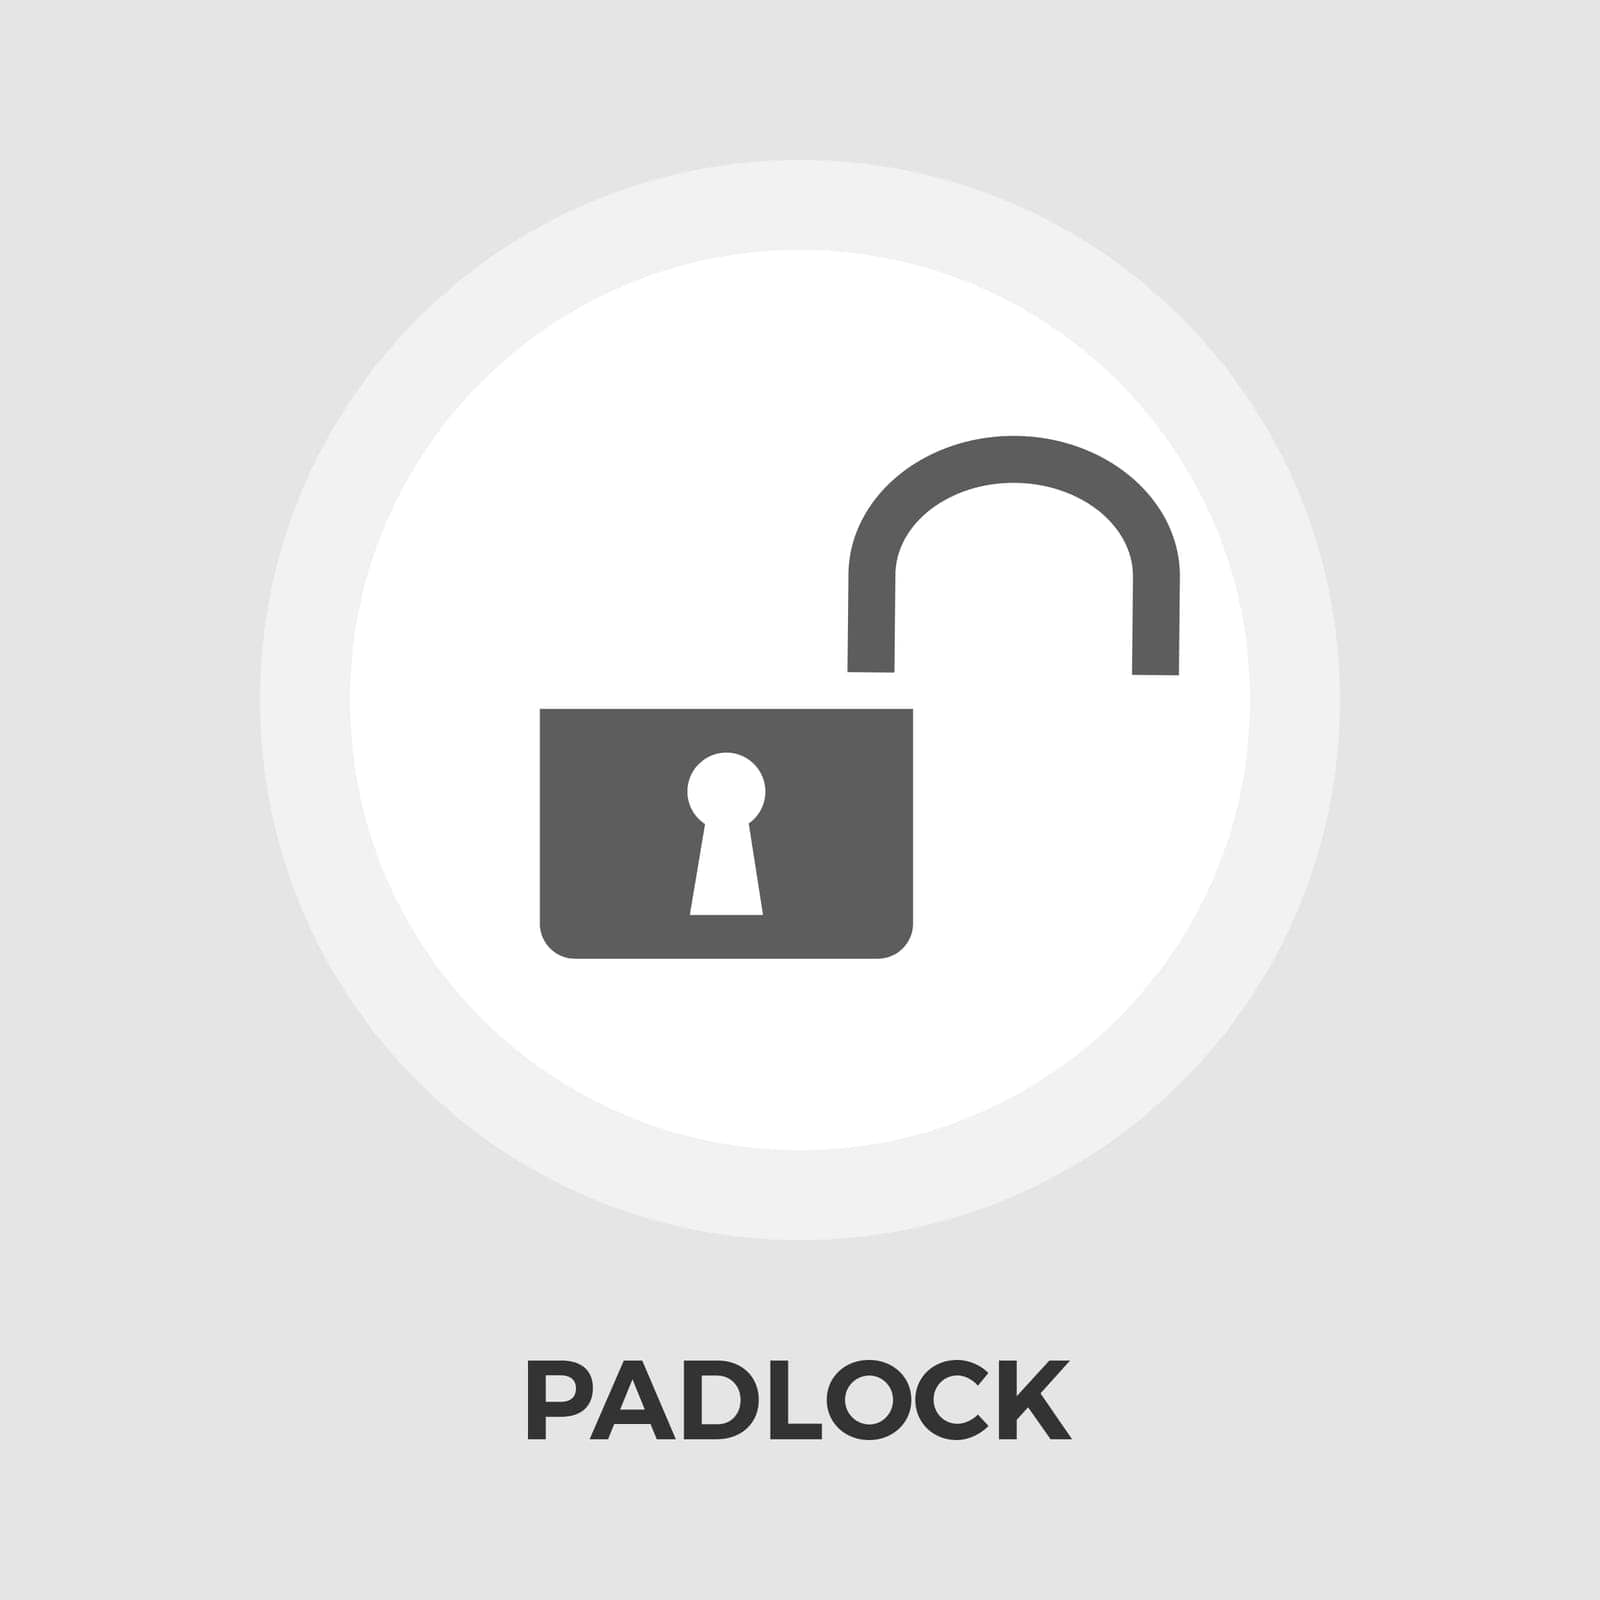 Padlock icon vector. Flat icon isolated on the white background. Editable EPS file. Vector illustration.